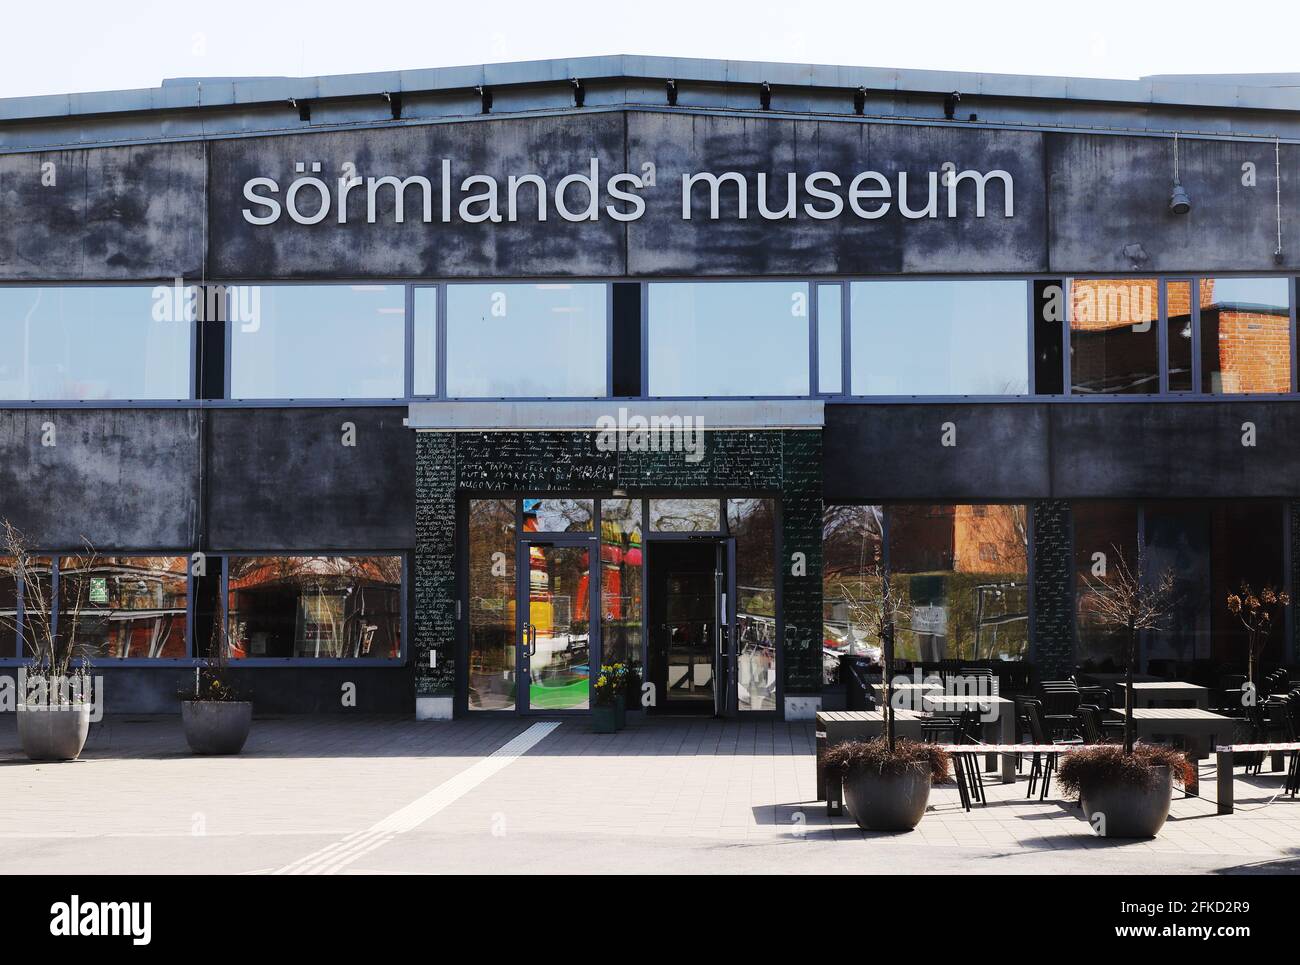 Nykoping, Sweden - April 18, 2021: The open entrance to the Sormlands museum. Stock Photo